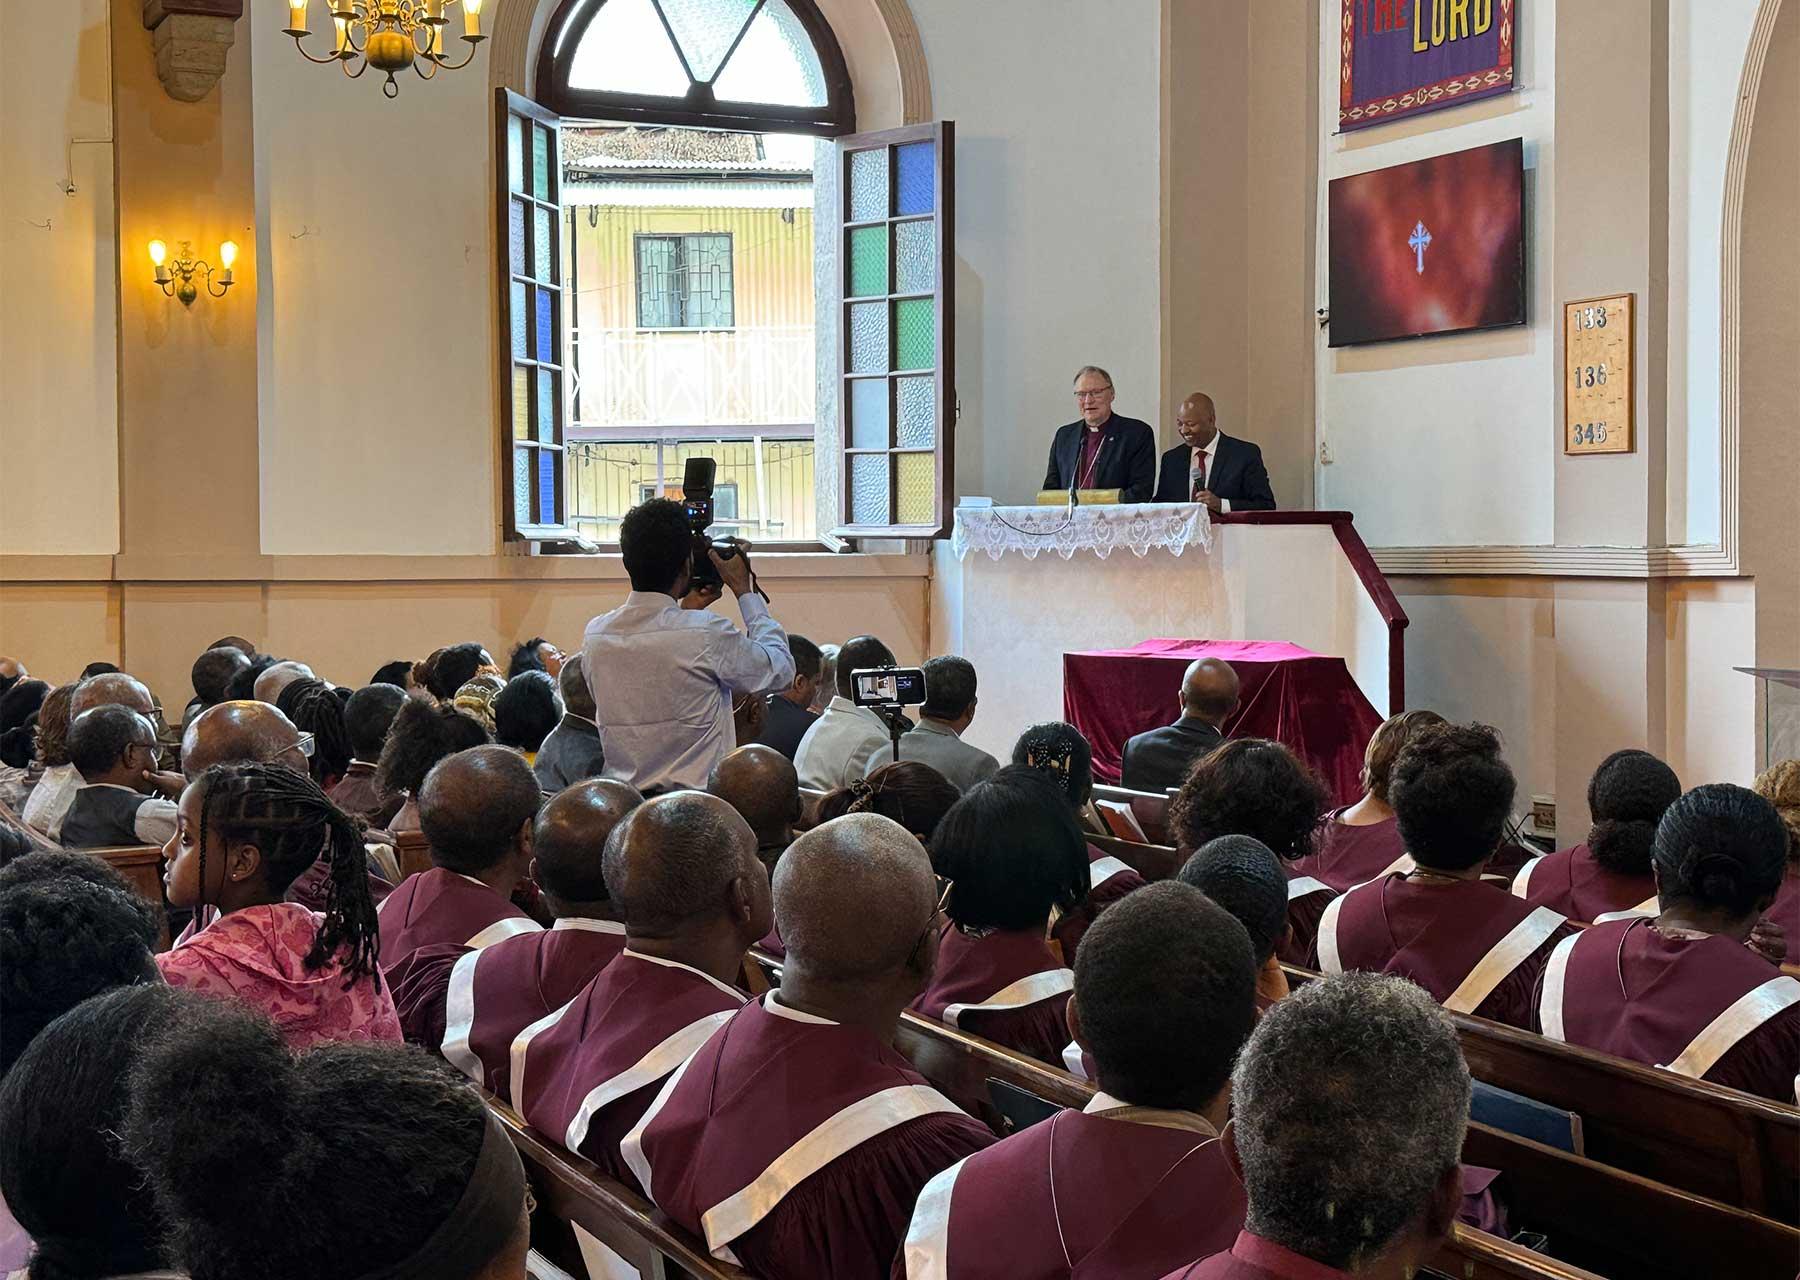 President Stubkjær joined worshippers at the oldest Lutheran church in country, built over a century ago. He praised the work of the church. “I have been so inspired by the vibrant witness of Mekane Yesus,” he said. “Thank you for welcoming us as family.” Photo: LWF/A.Danielsson